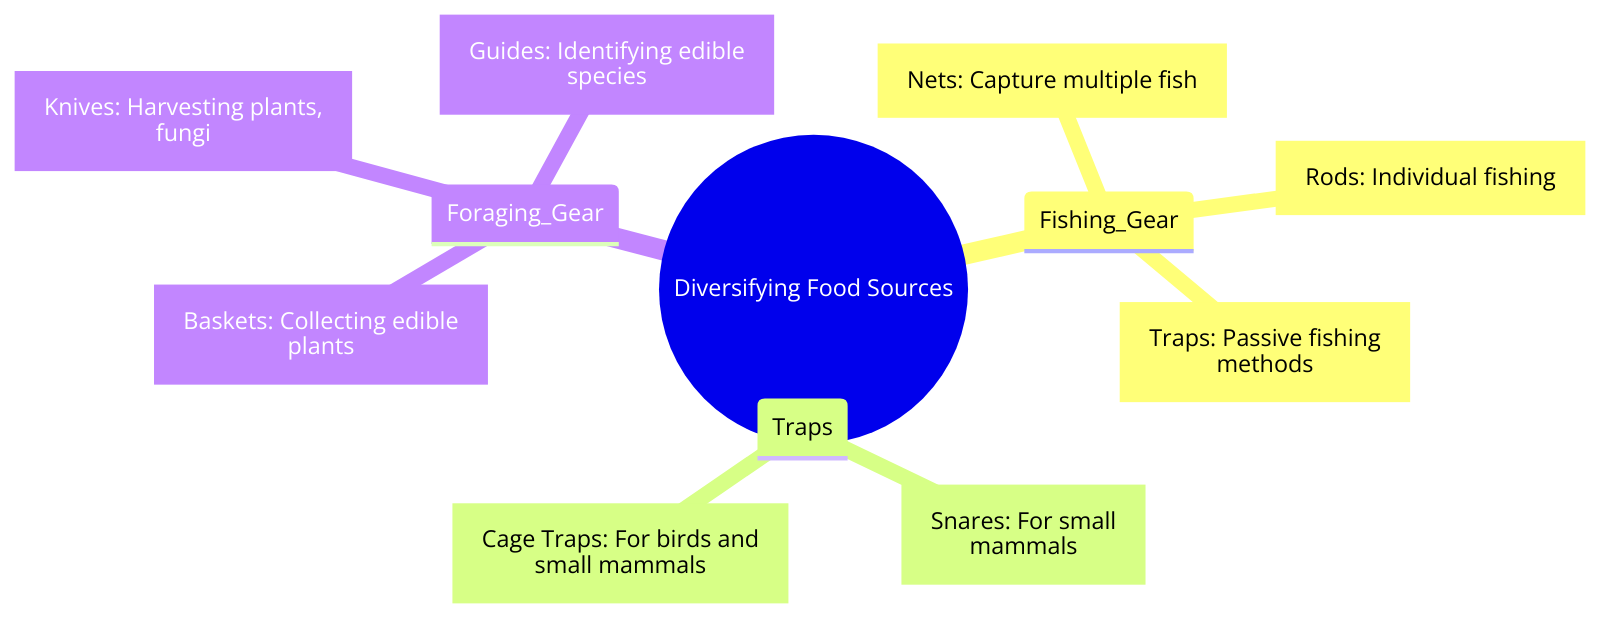 the relationships between different food procurement tools (fishing gear, traps, foraging gear)